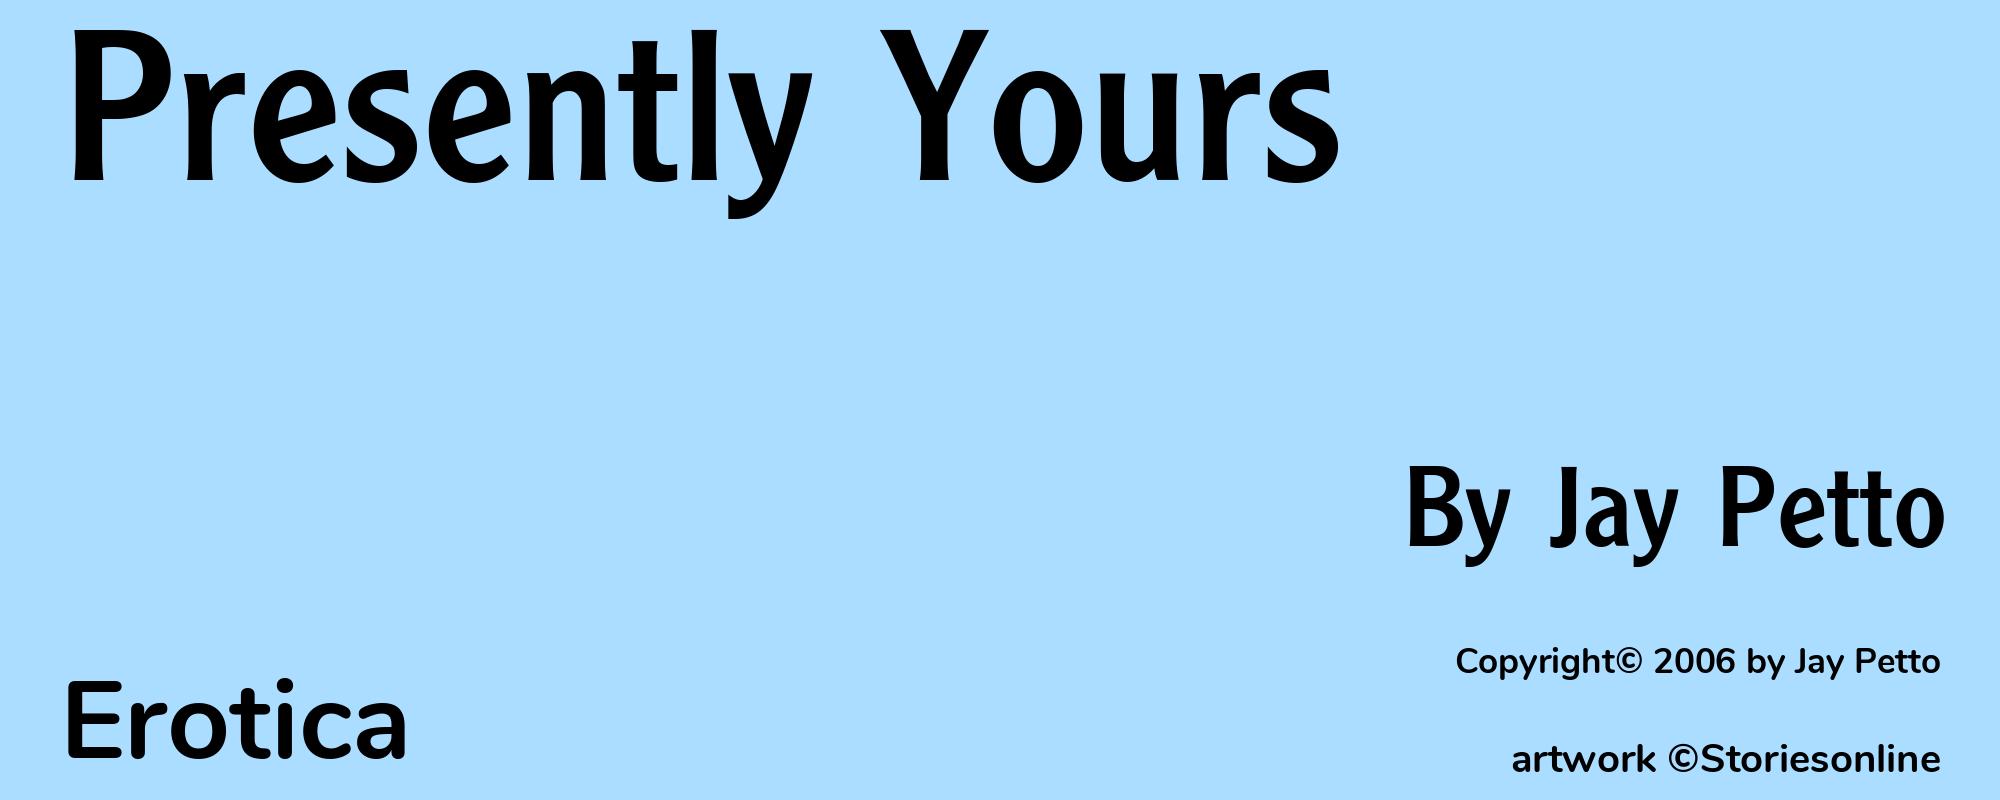 Presently Yours - Cover